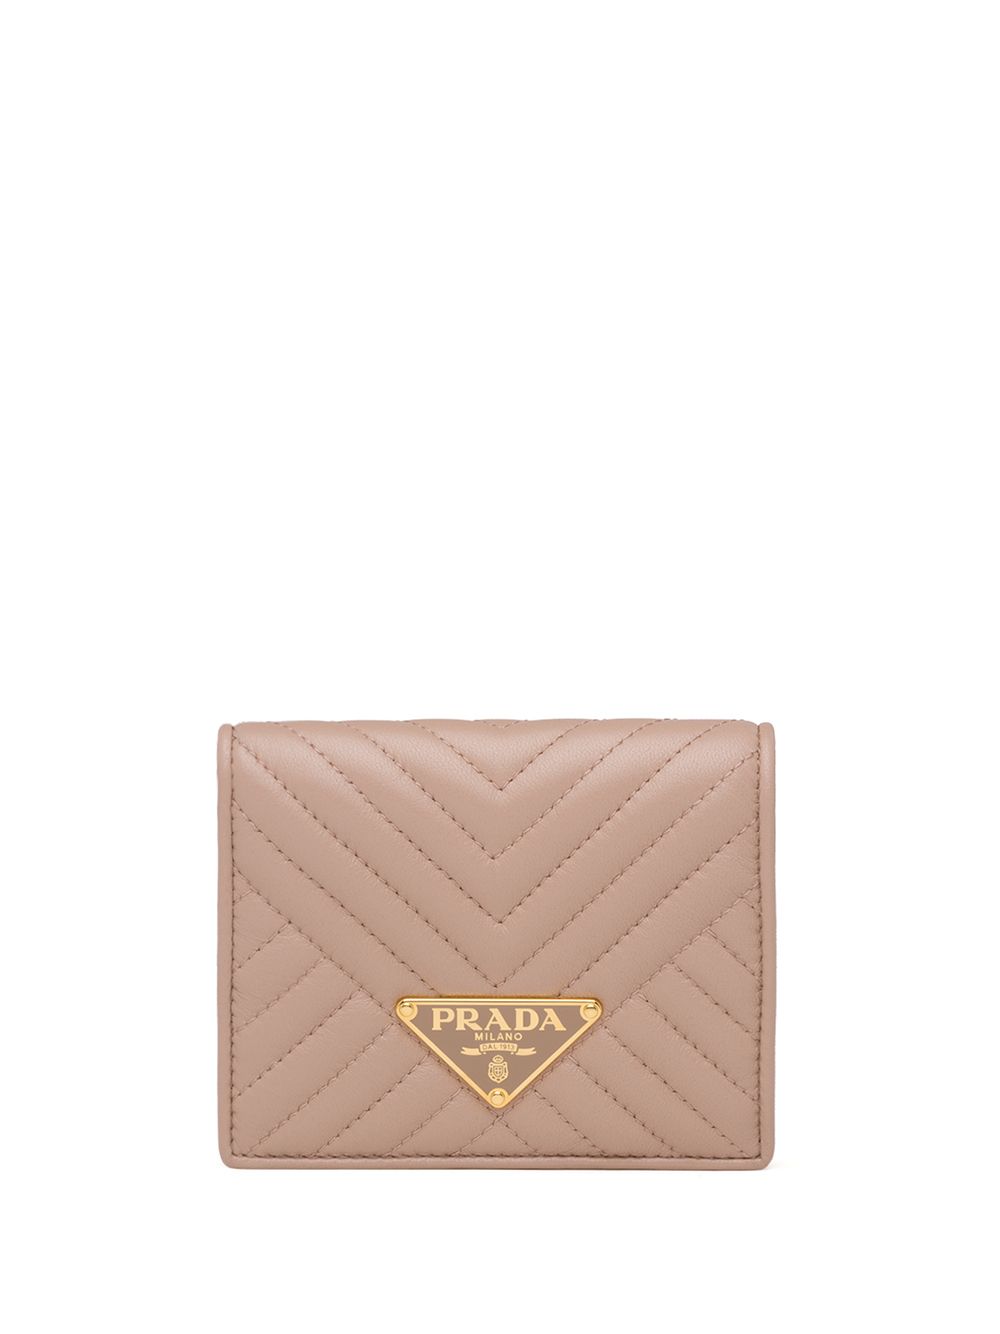 Prada Small Stitched Nappa Leather Wallet In Pink